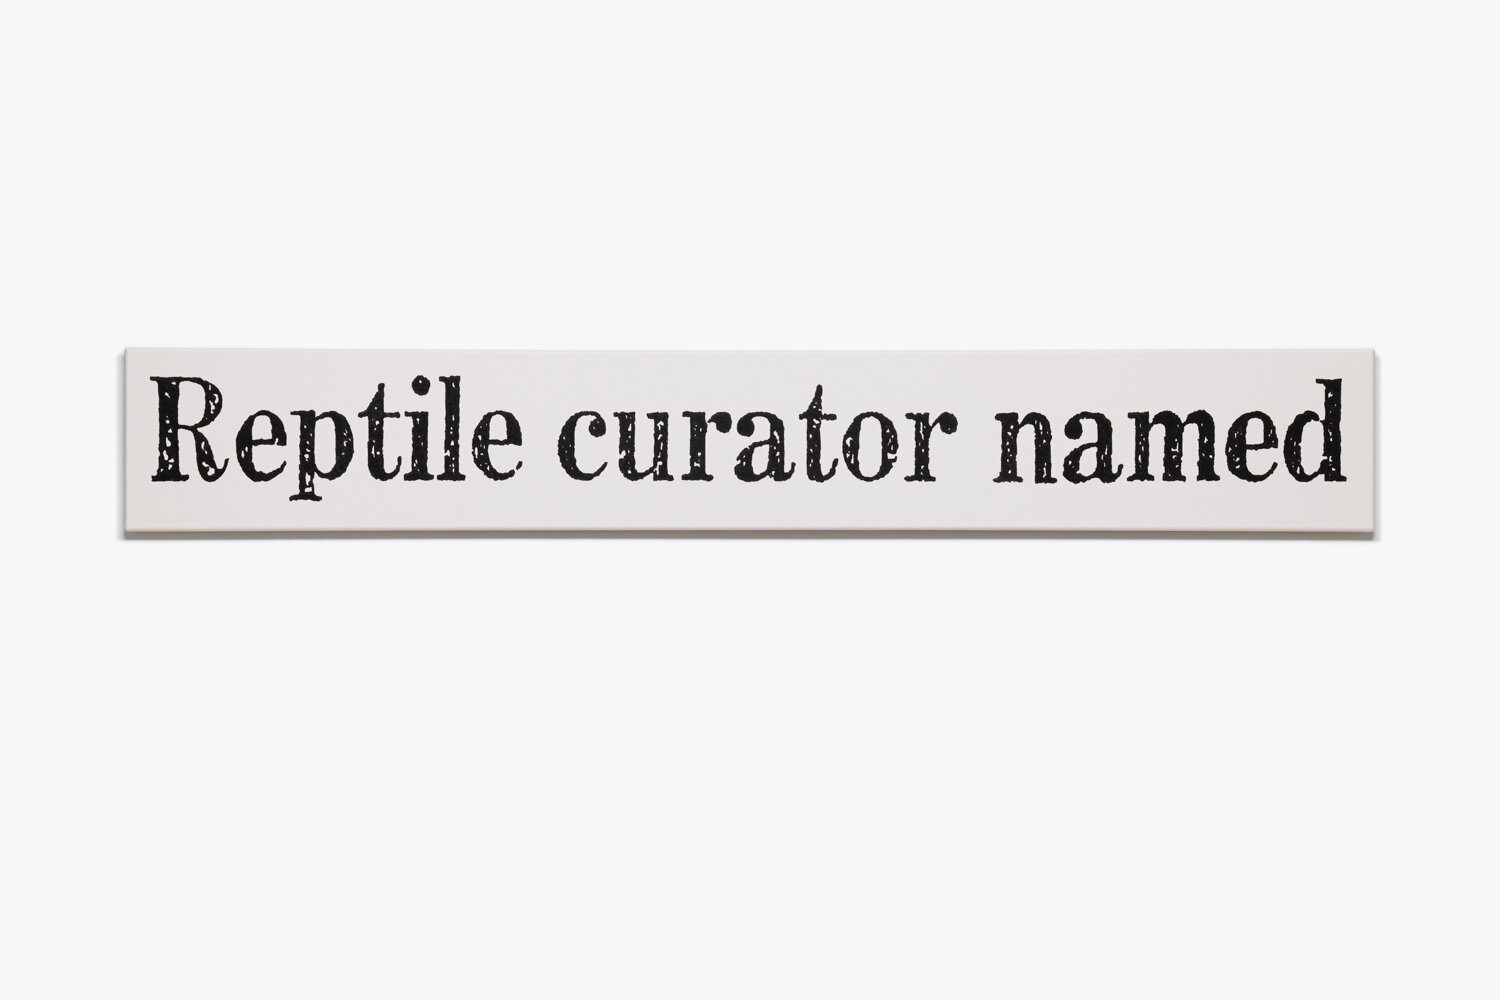  Reptile curator named (July 12, 1968) 2021